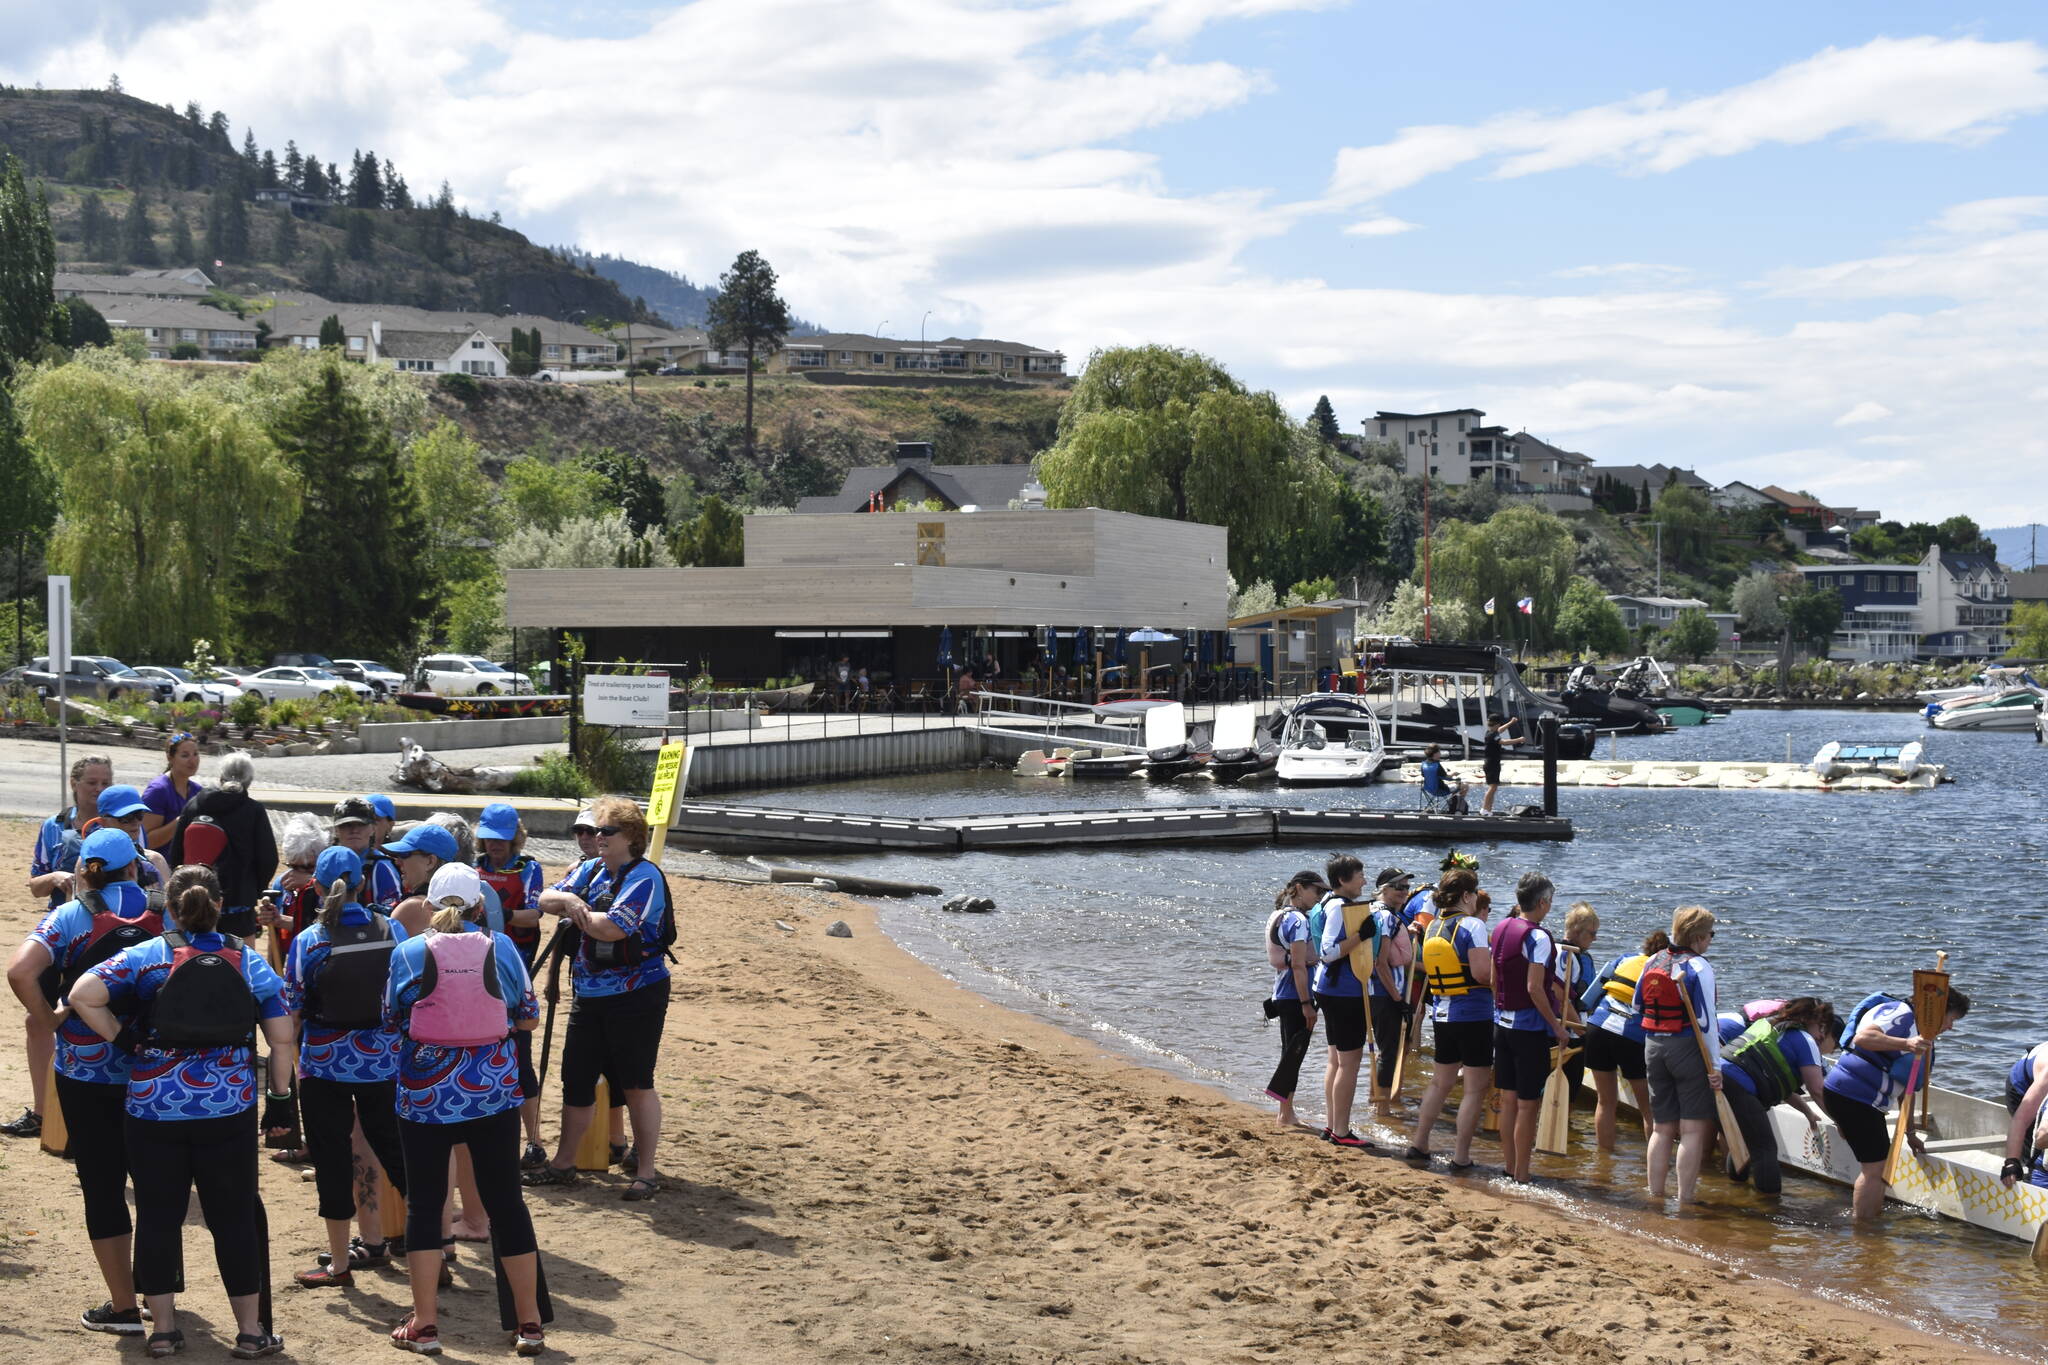 Hundreds of dragon boaters are in Penticton this week for a regional event. The new Dragonboat Pub was a popular spot for many on Saturday, June 10. (Logan Lockhart/Western News)